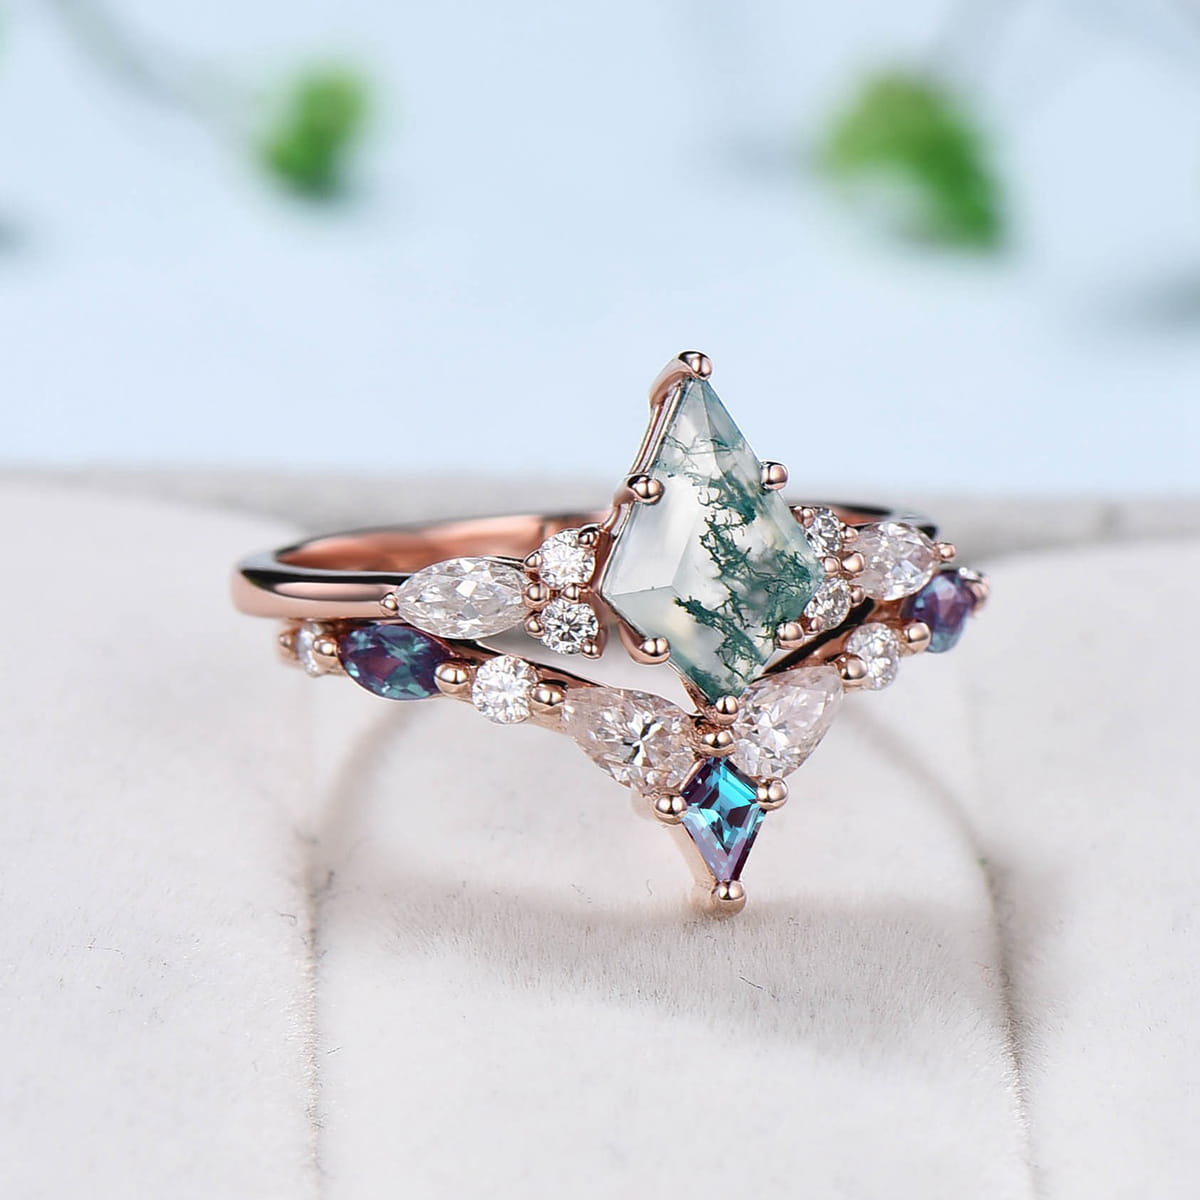 Vintage moss agate ring rose gold unique Kite cut aquatic agate engagement ring cluster alexandrite moissanite gold bridal wedding ring set - PENFINE